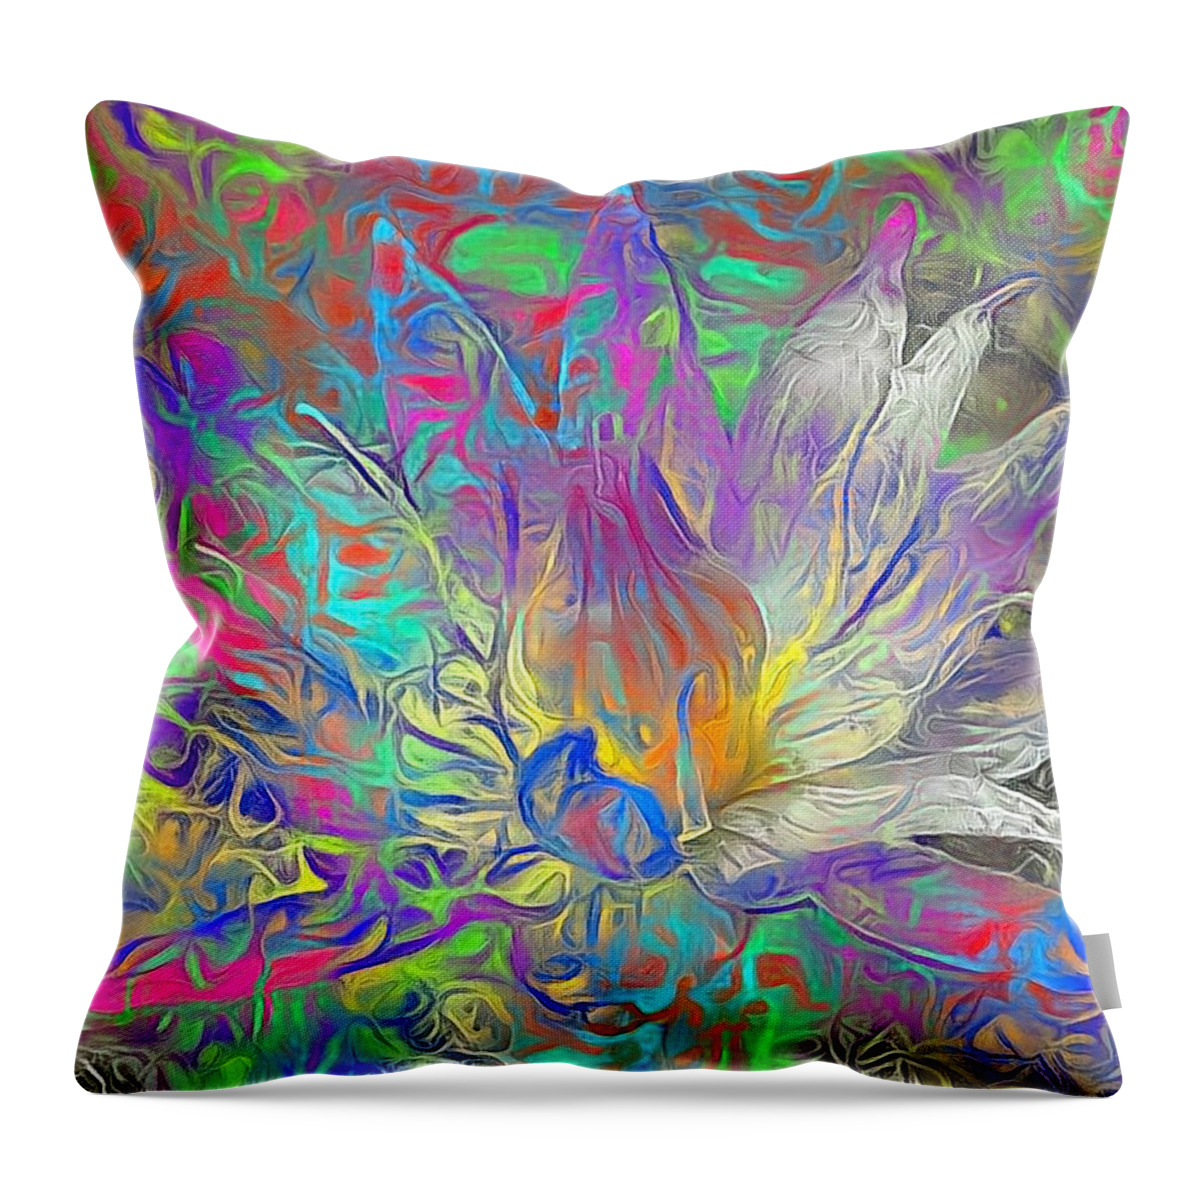 Abstract Throw Pillow featuring the digital art Beautiful Lotus Flower by Bruce Rolff